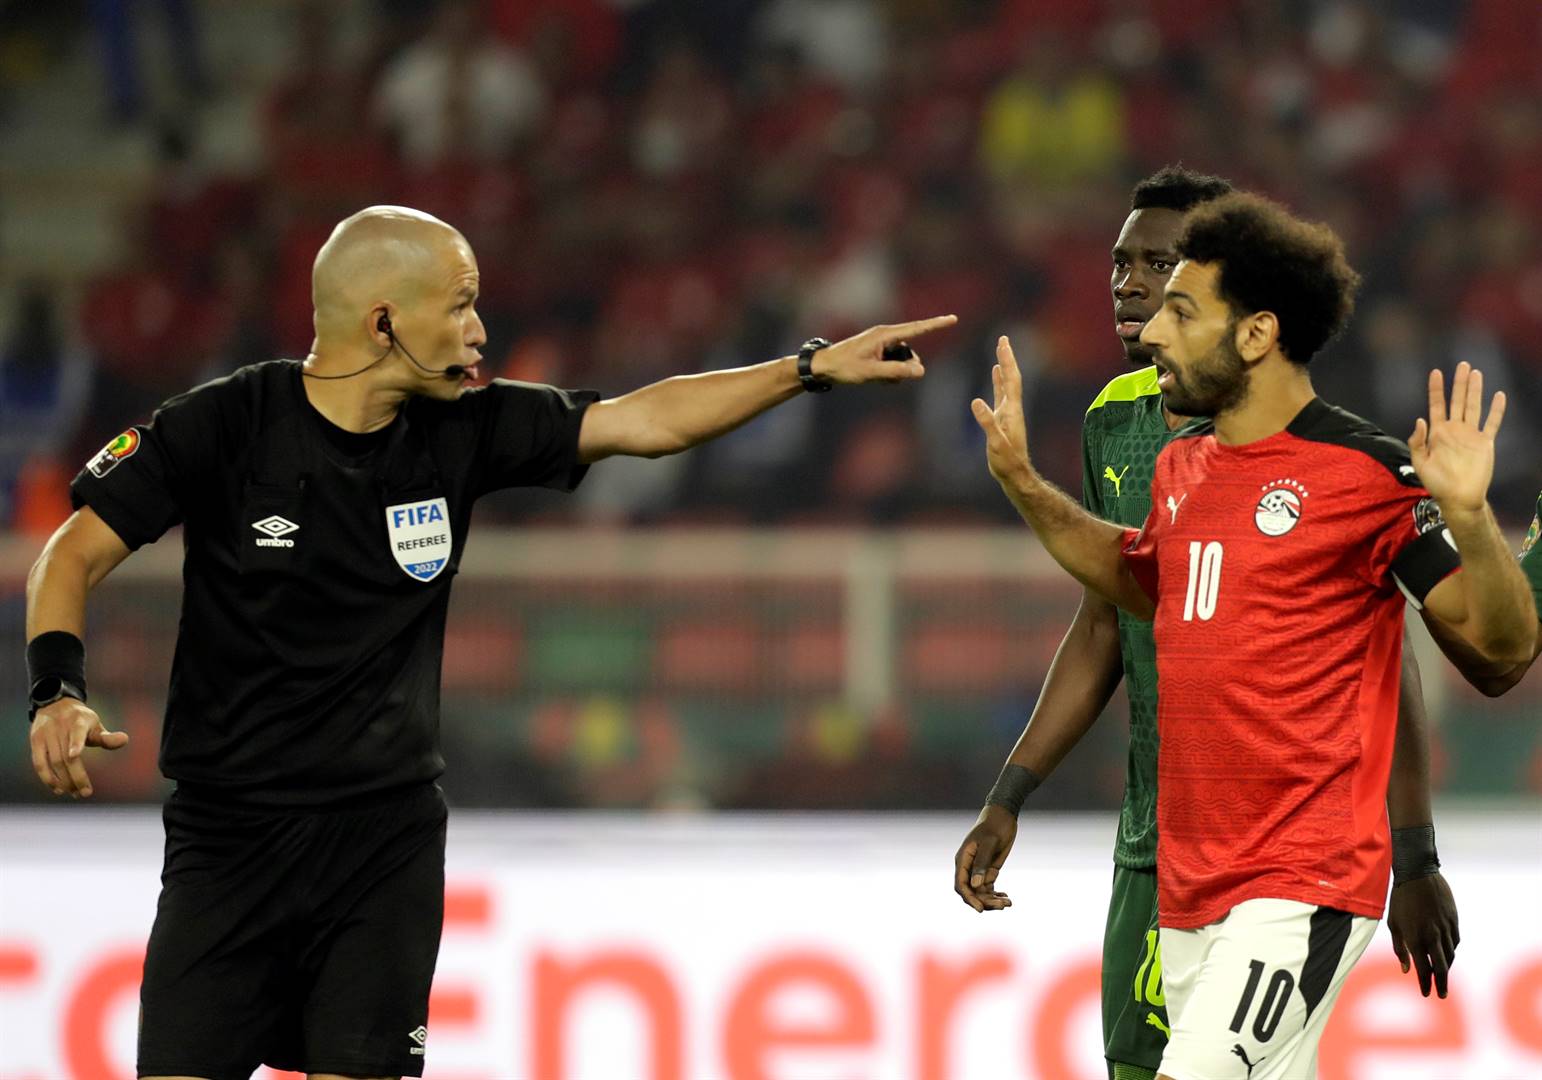 Referee Victor Gomes calling Mohamed Salah to order during the Afcon final between Egypt and Senegal in Younde last Sunday )PHOTO: Sunday Alamba / AP